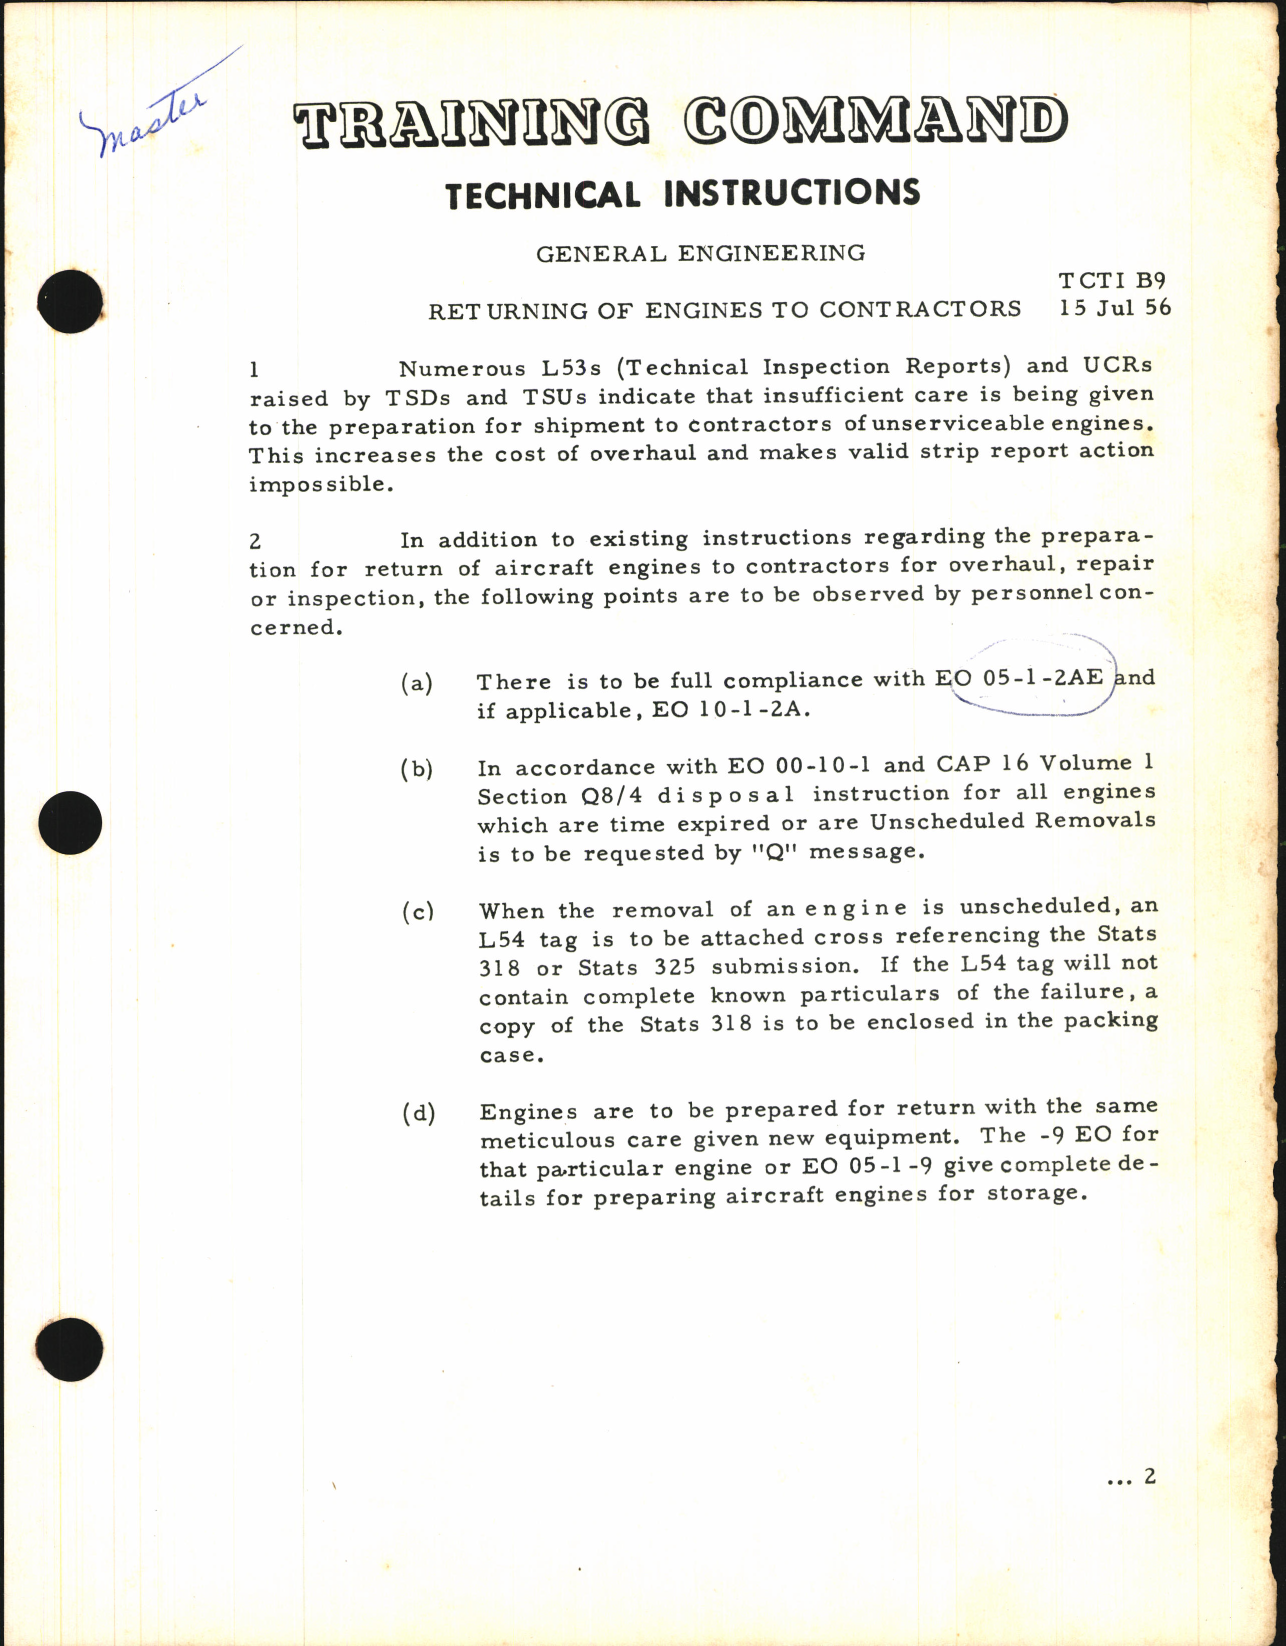 Sample page 1 from AirCorps Library document: Training Command Technical Instructions for Returning of Engines to Contractors